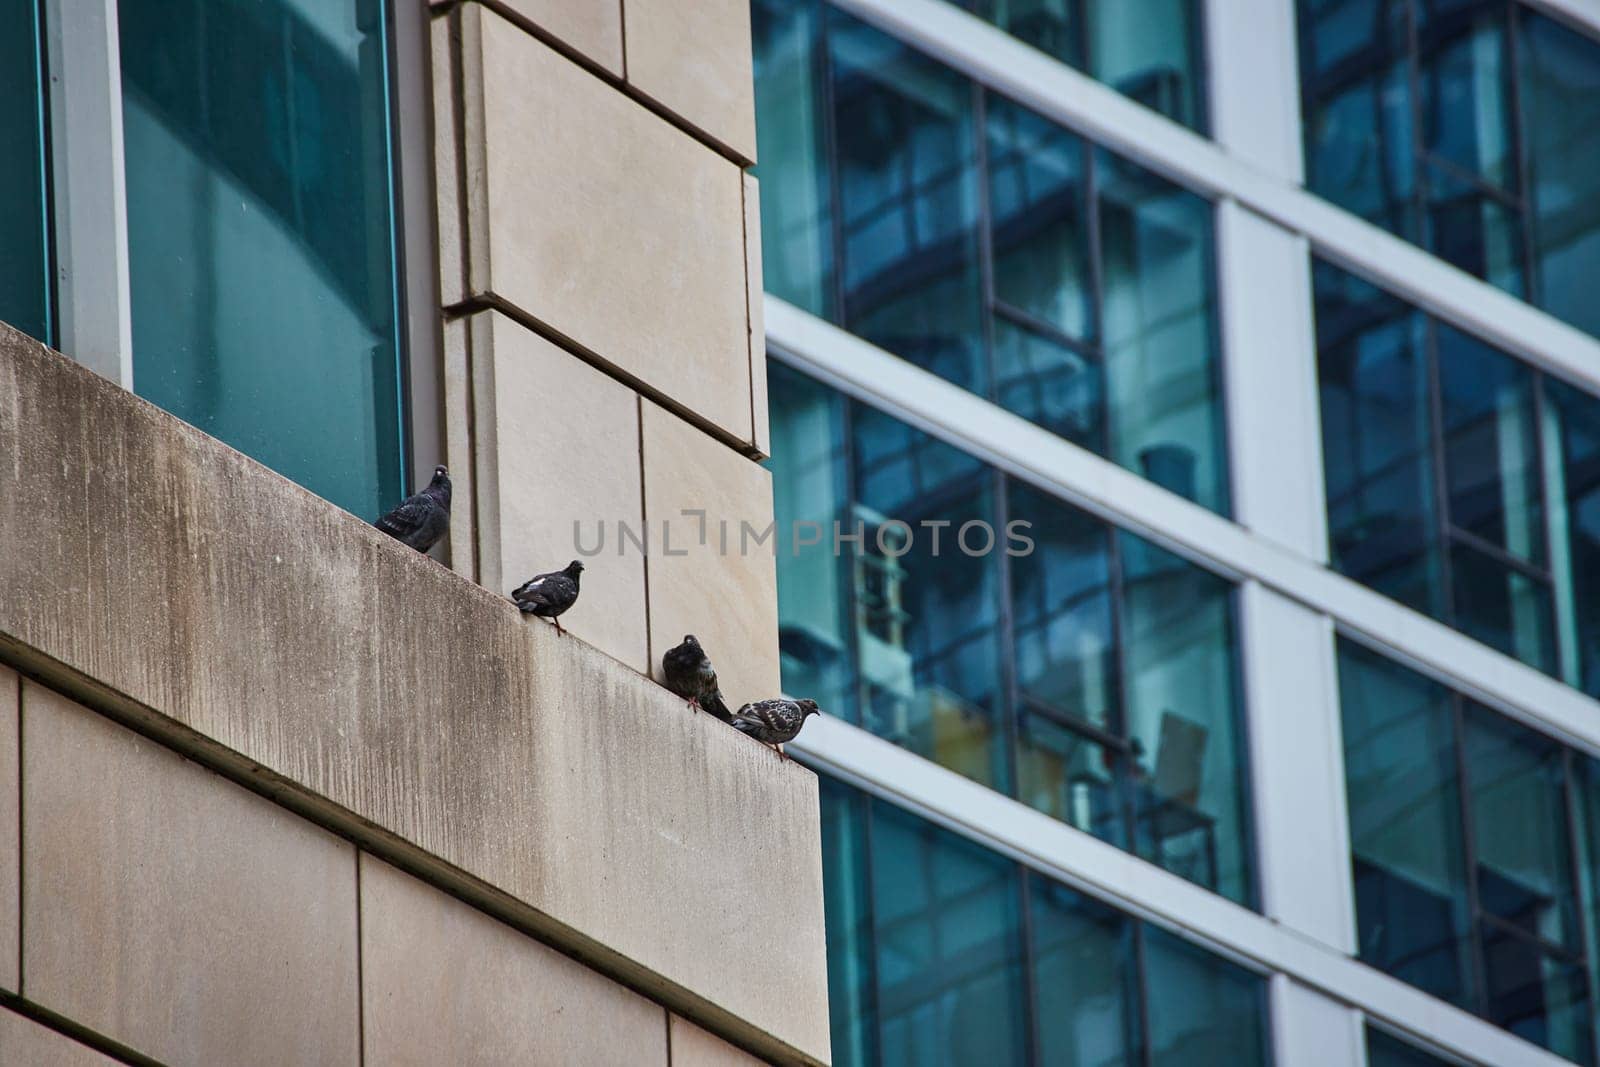 Image of Pigeon, bird, animals standing on wall ledge of office building with blue tinted windows, Chicago